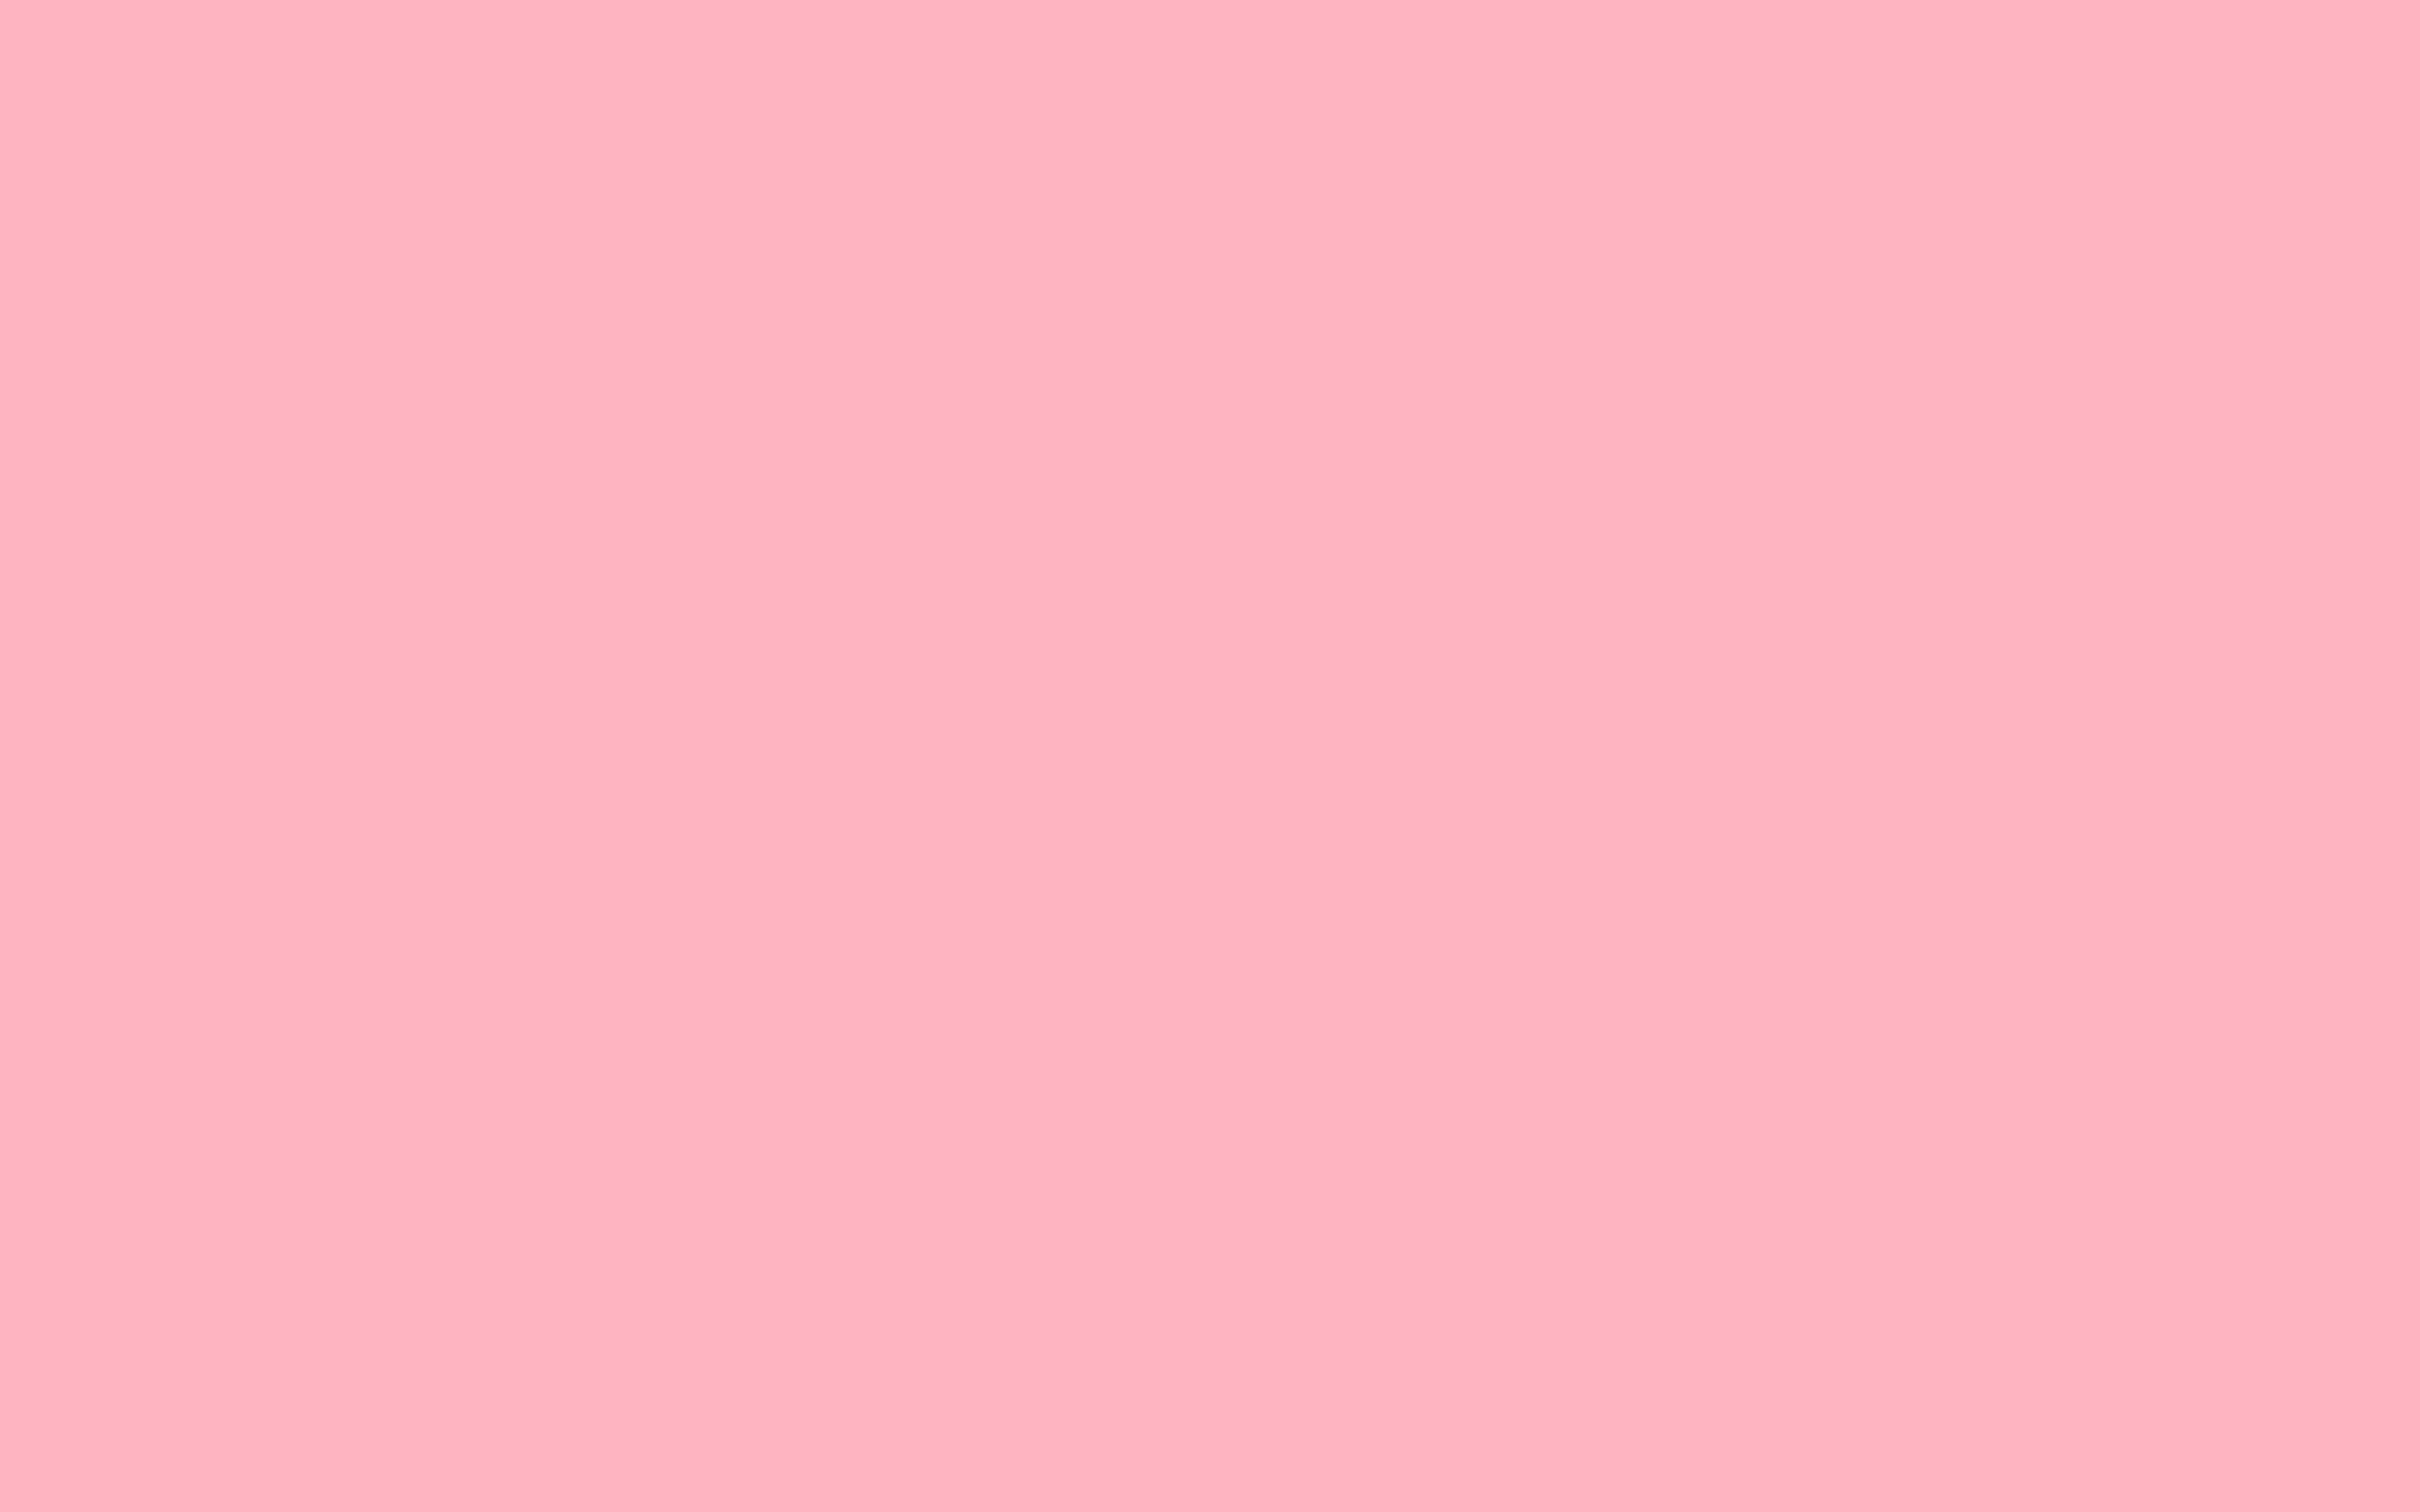 Bright and Simple Pink Background